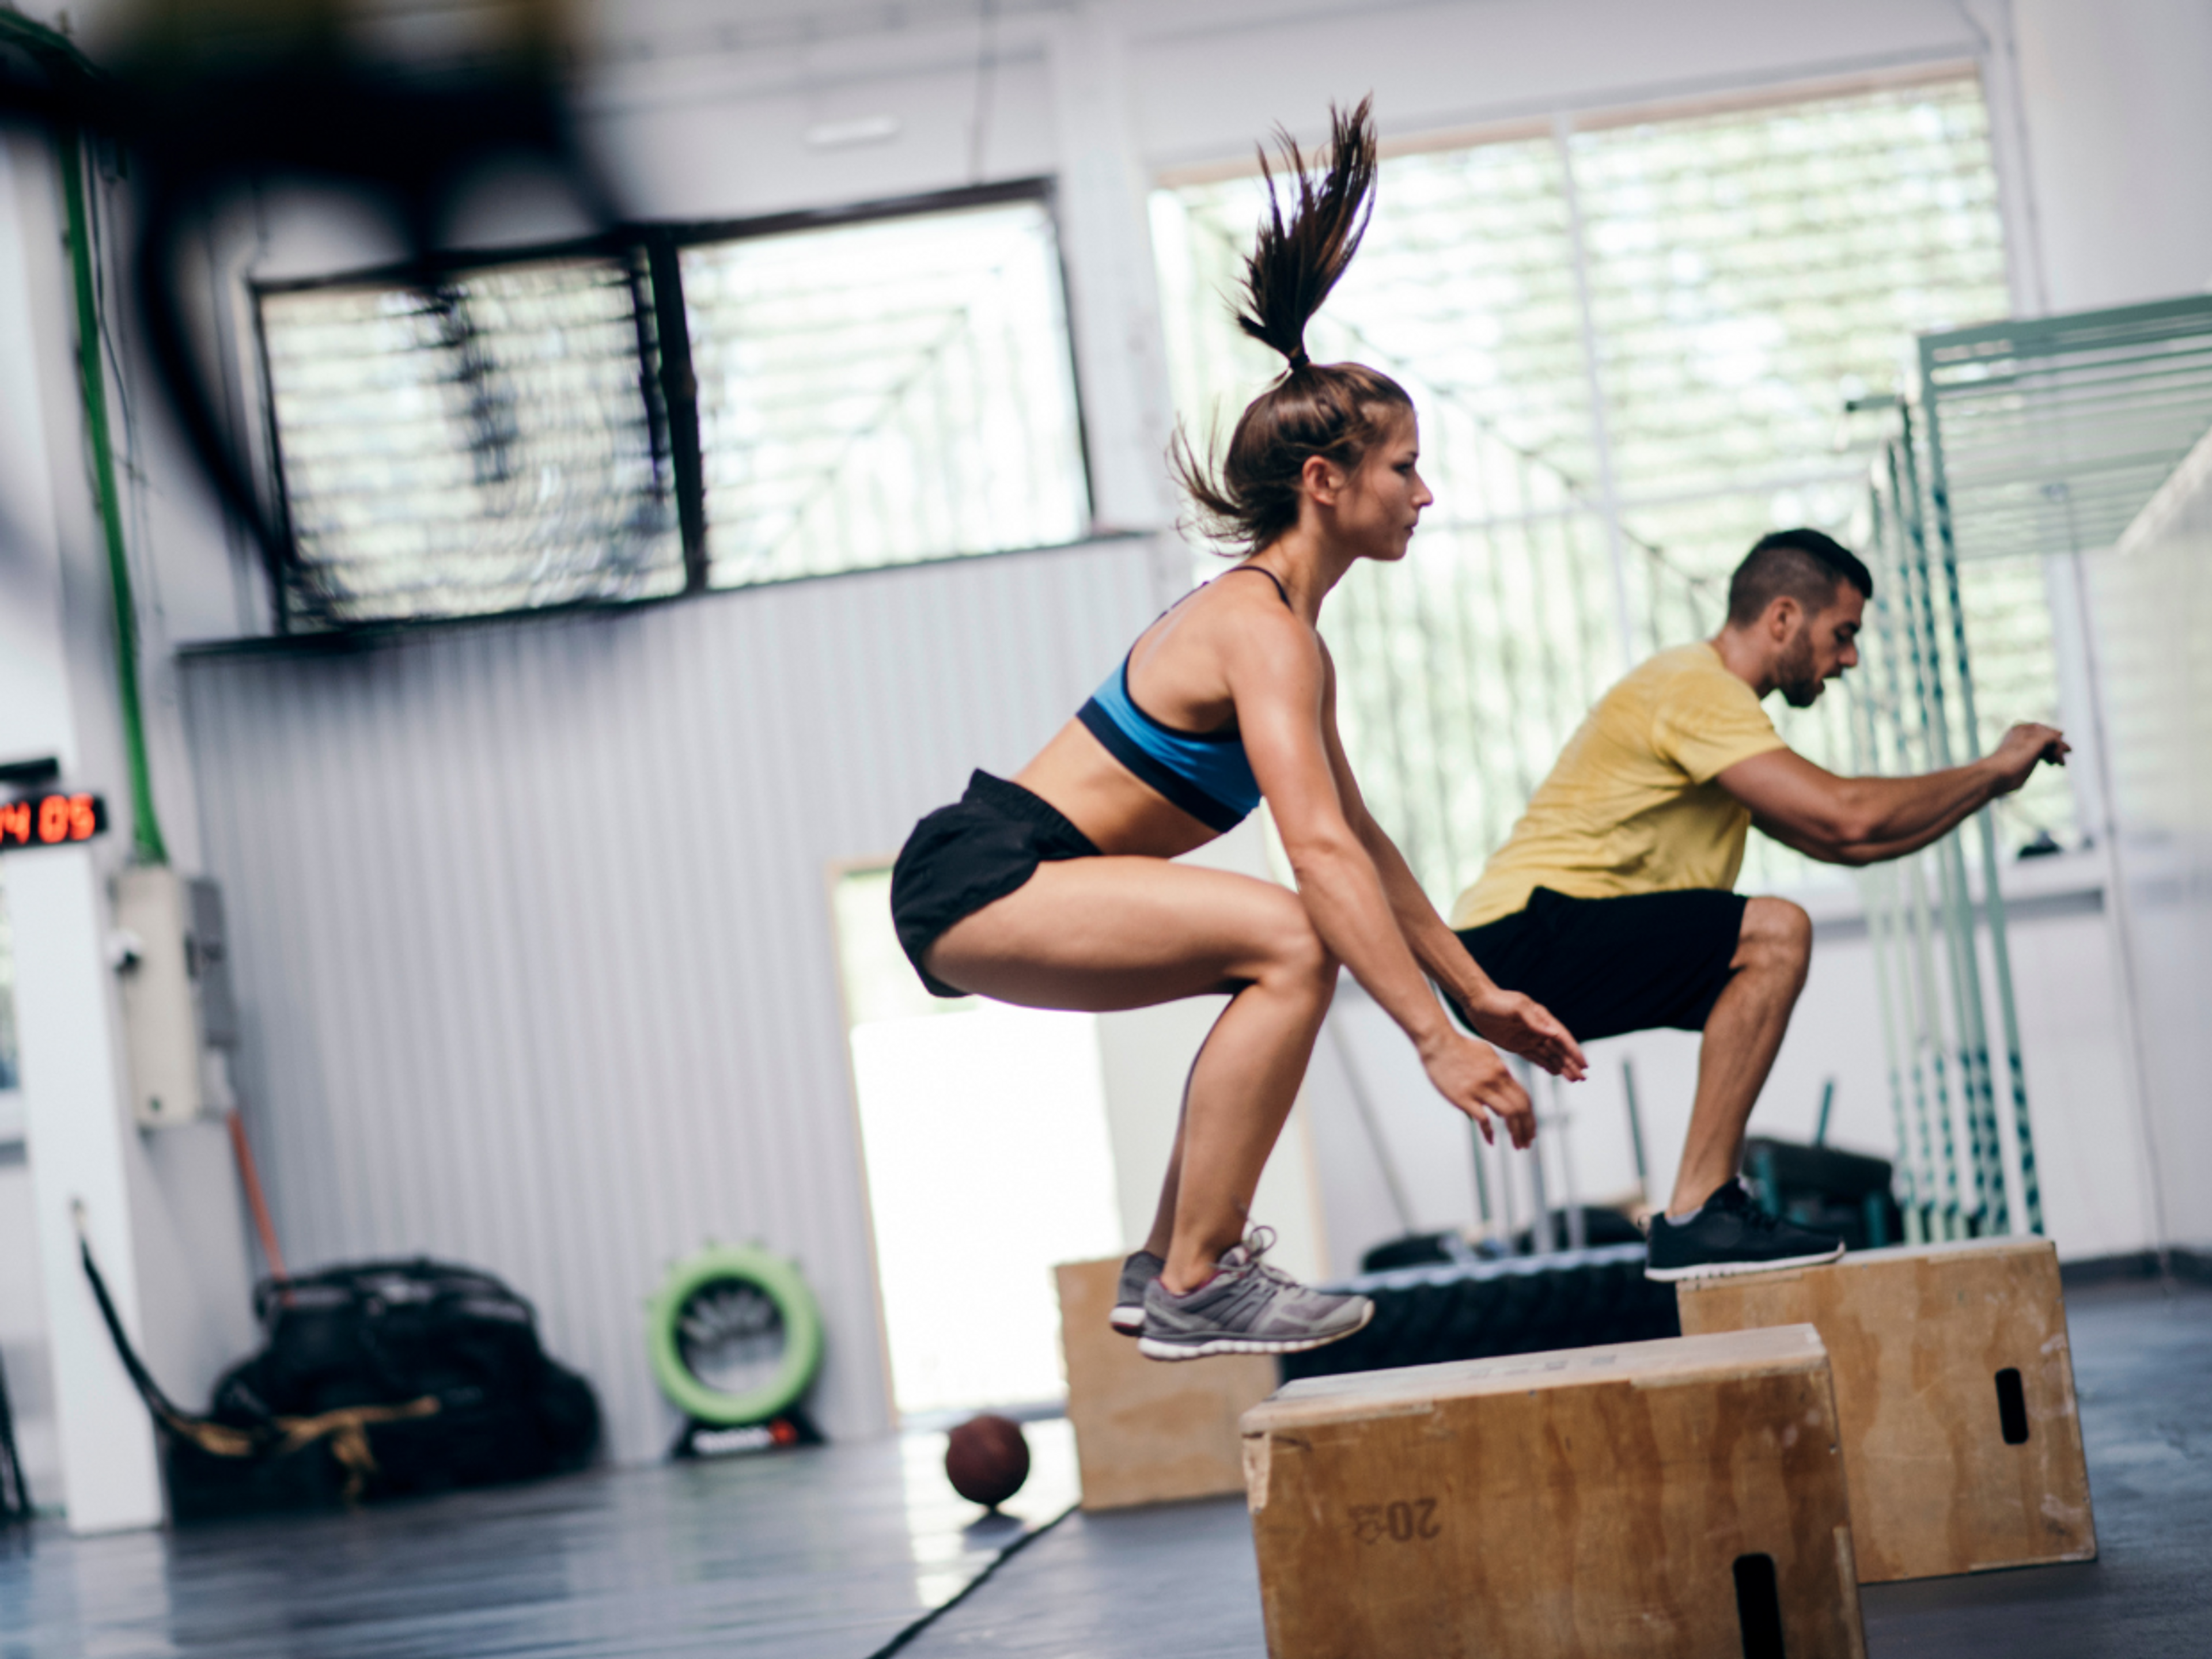 Man and woman performing box jumps as an exercise for patellar tendonitis.